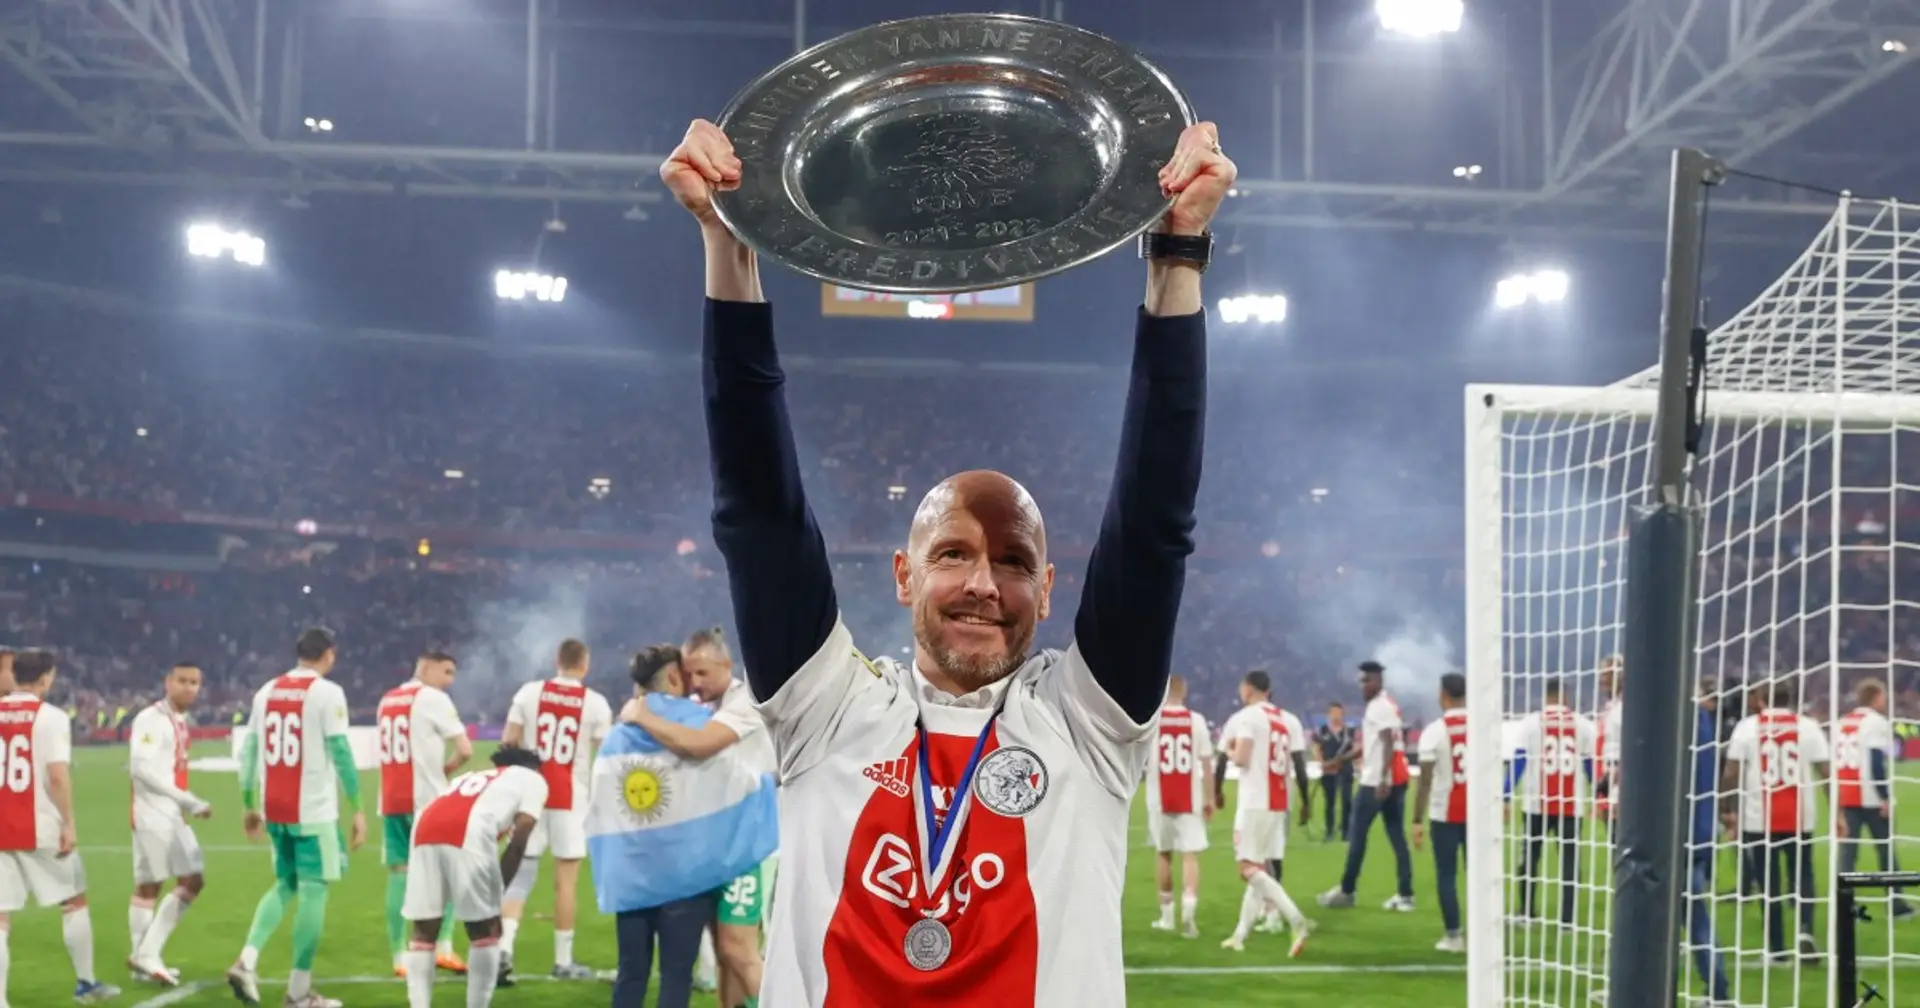 'Ajax is Europe proof again and Ajax plays for titles': Ten Hag shares his thoughts on his time at the club